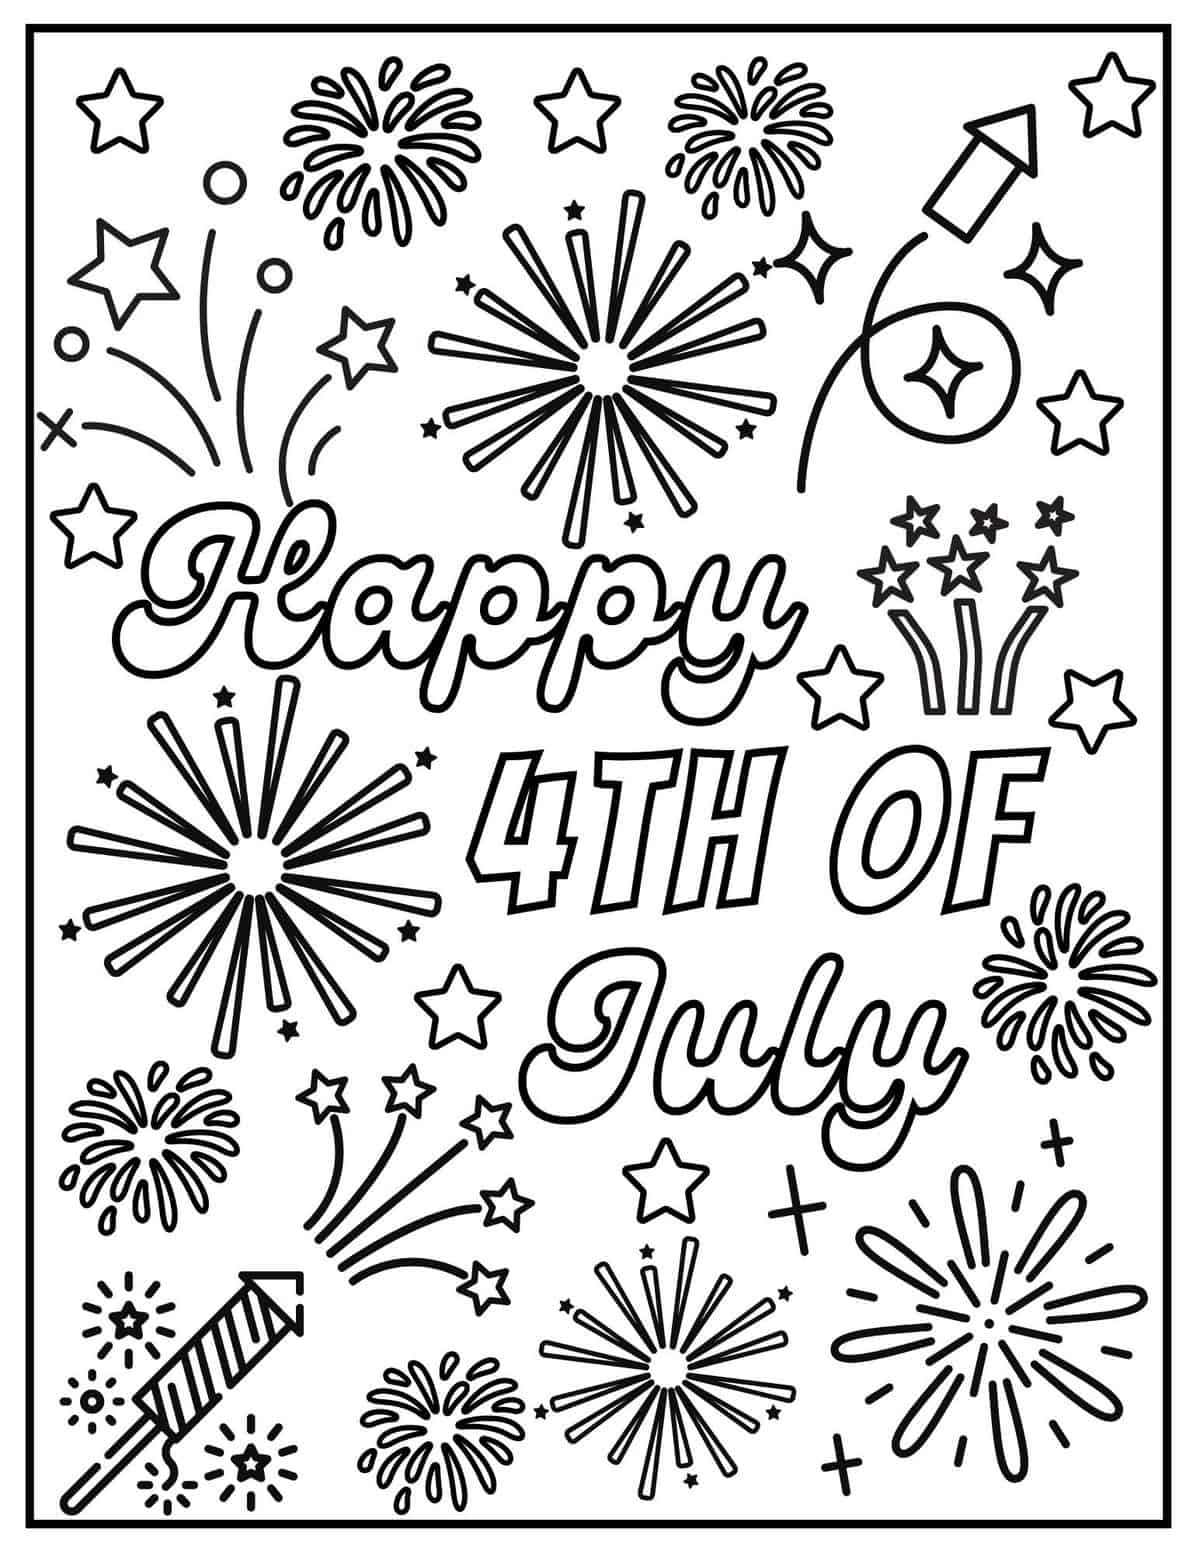 Celebrate Freedom with 4th of July: 180+ Free Coloring Pages 84